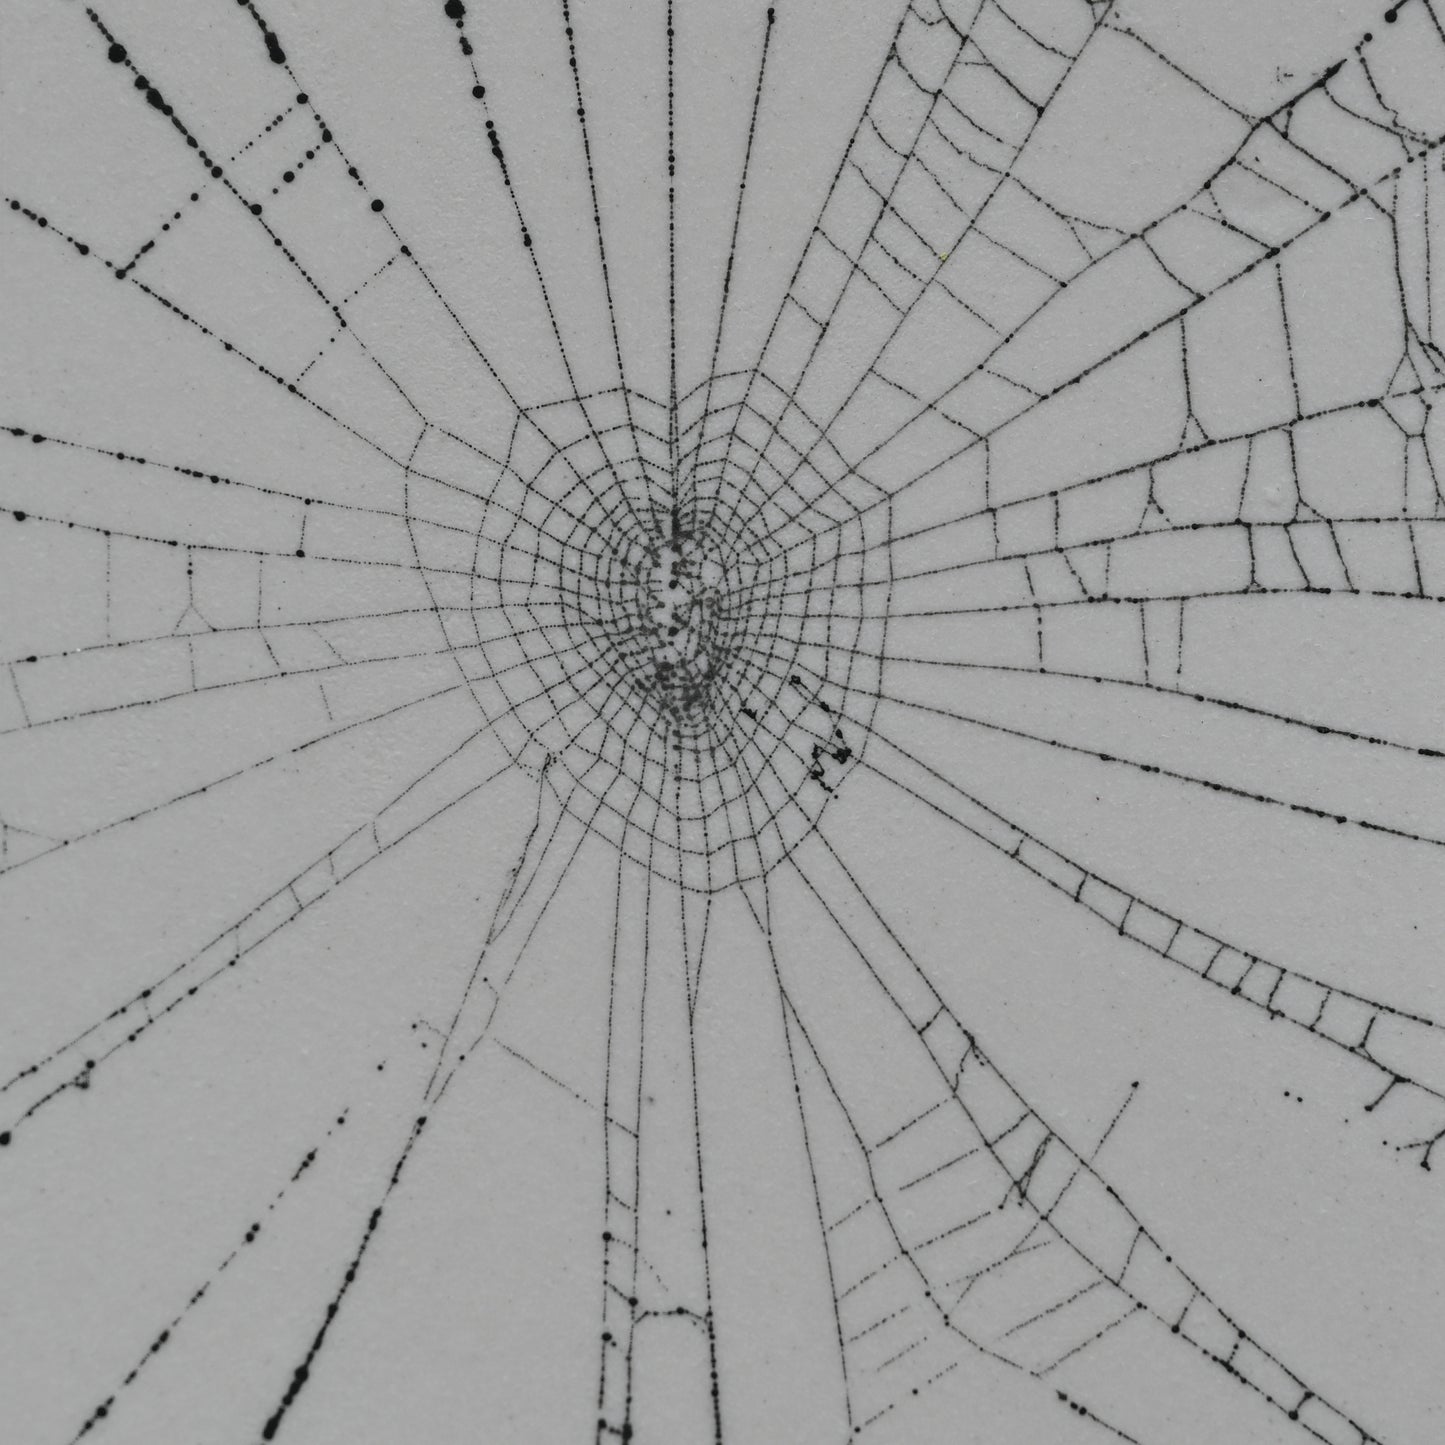 Web on Clay (136), Collected August 19, 2022